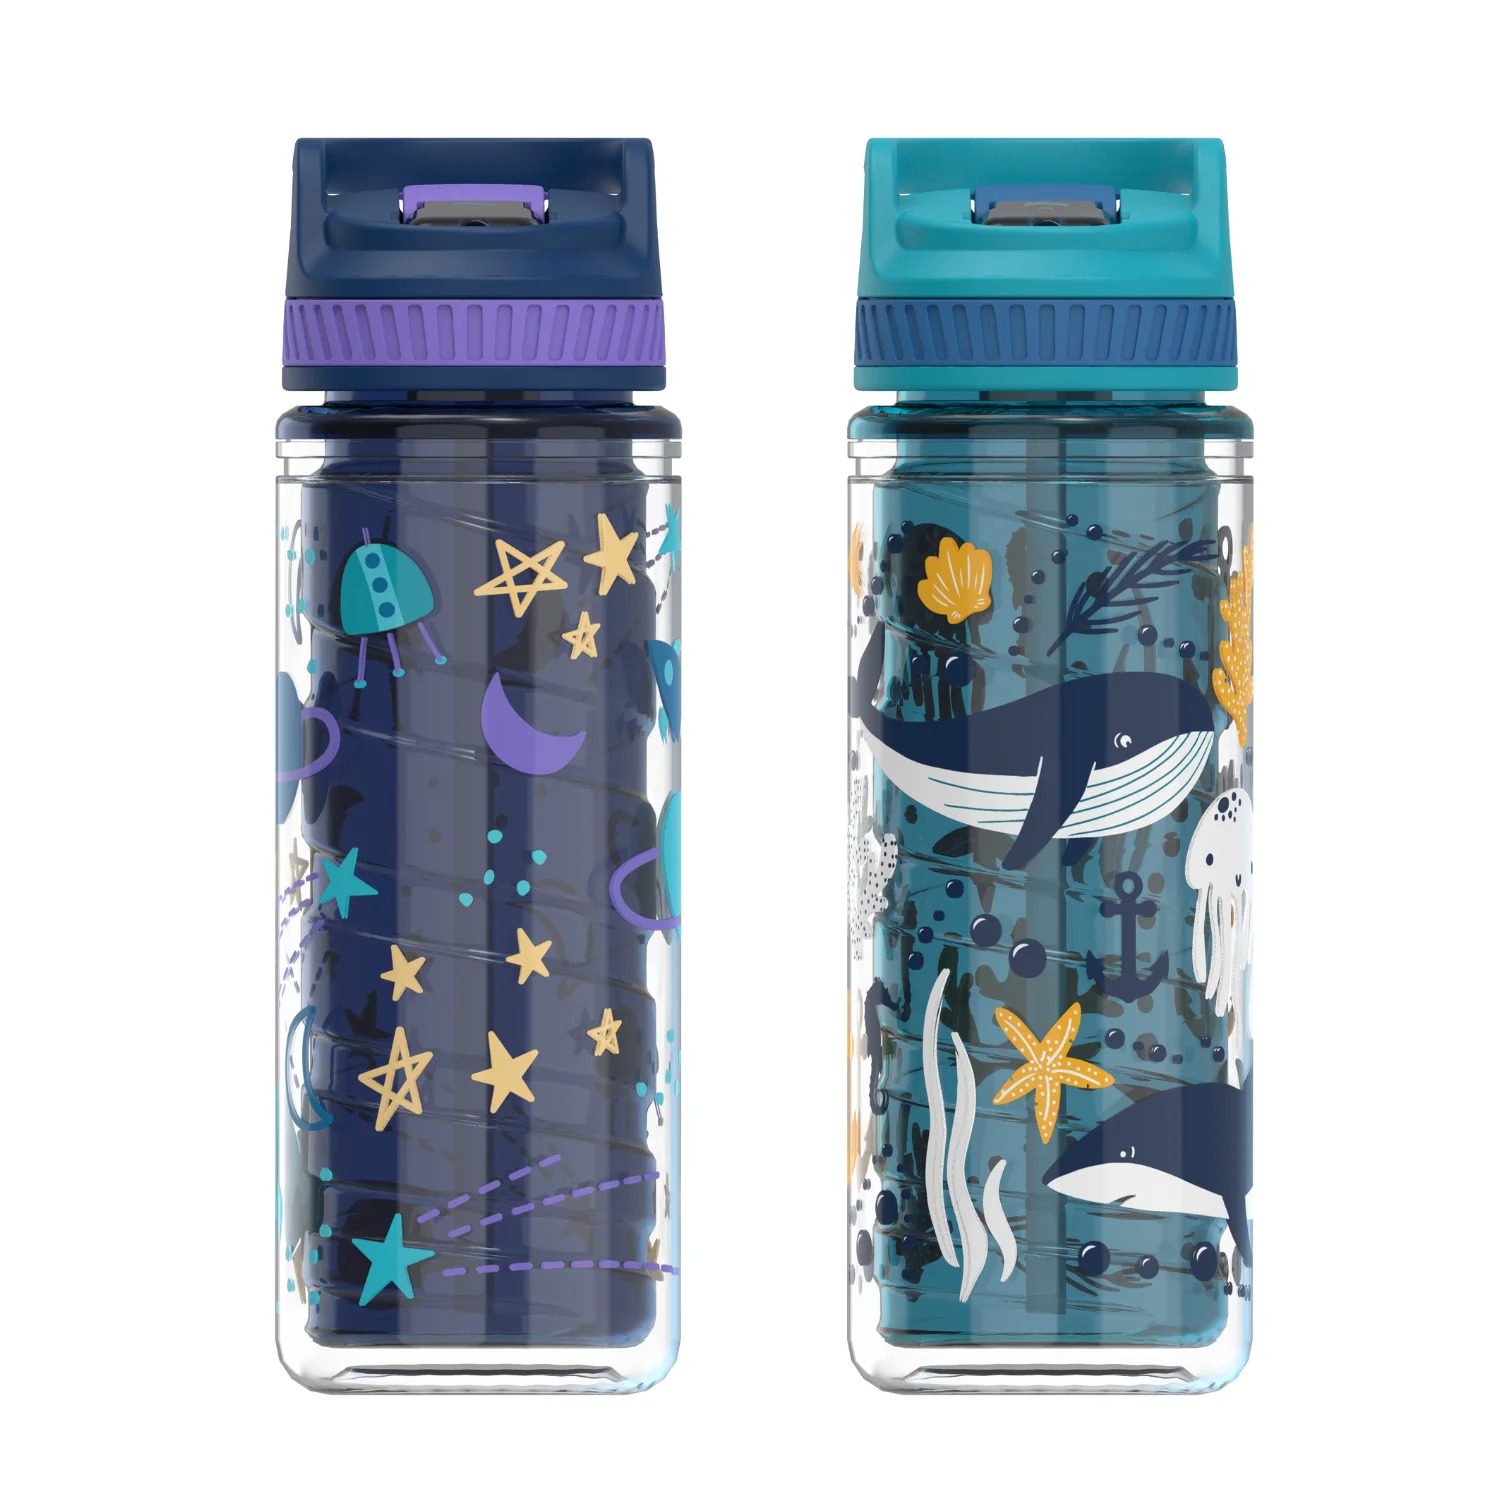 Cool Gear 2-Pack 16 oz Kid's Twist Water Bottle with Double Wall, Sipper Lid and Finger Loop Cap with Printed Design | Great for School, Sports, Outdoors, and More - Cellestial/ Sea Life - image 1 of 3